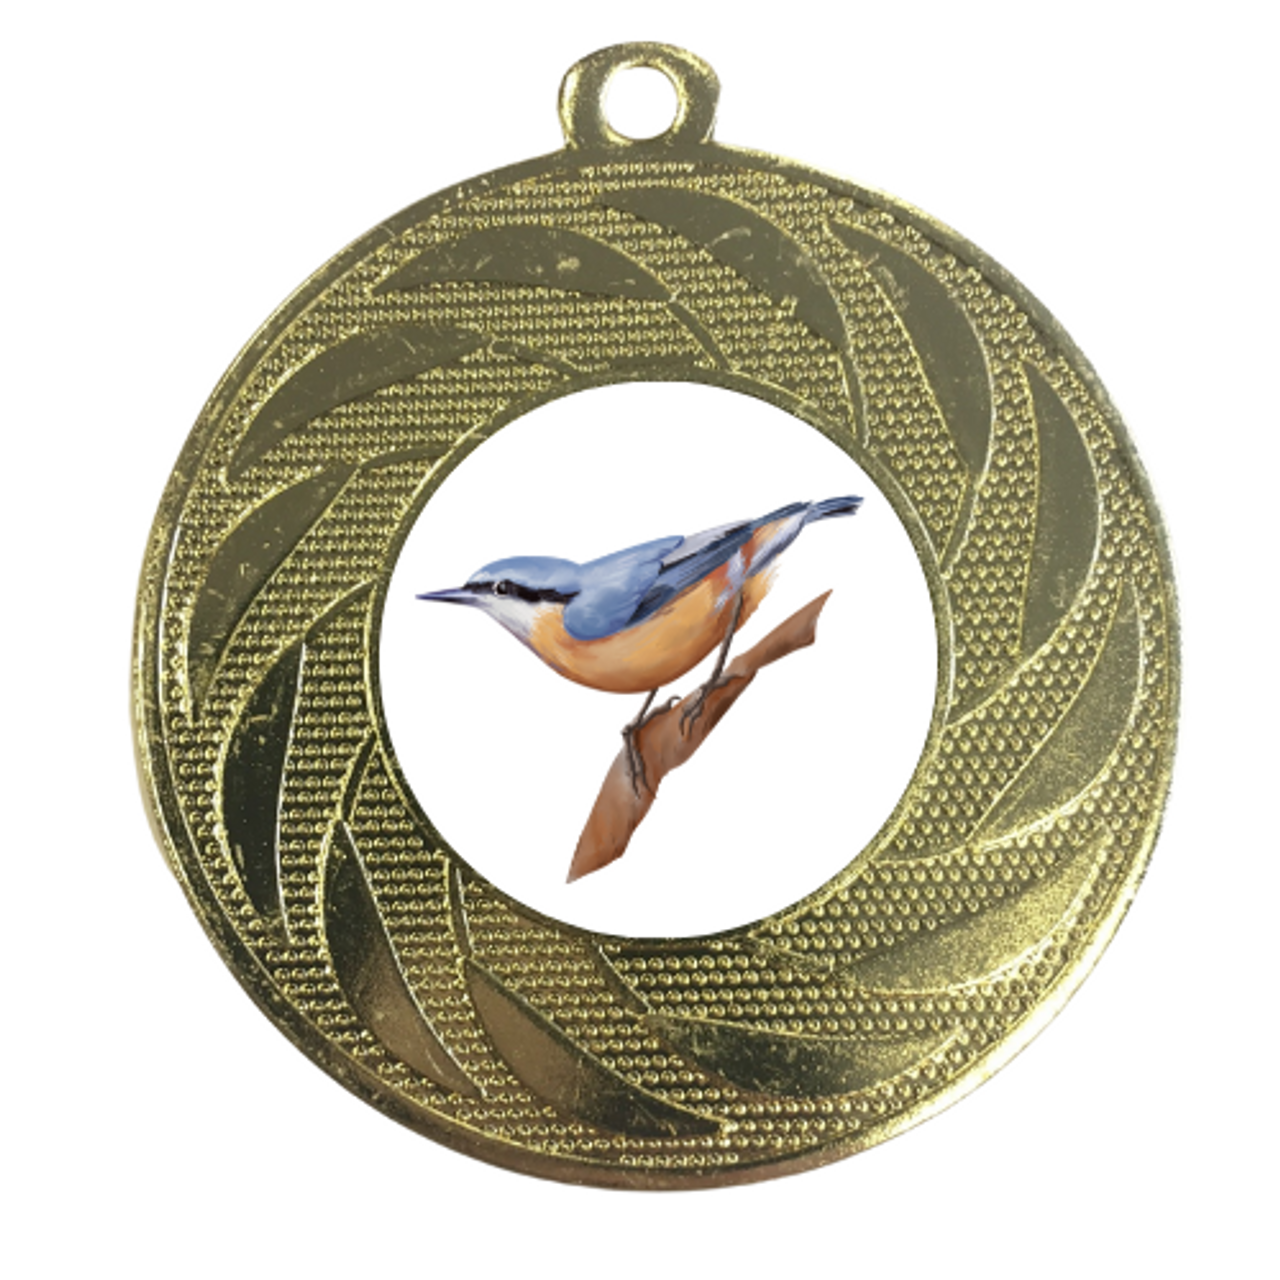 Wingspan Game Medal Nuthatch Nature Lovers Personalised Birdwatching Birding Twitching Award RSPB 